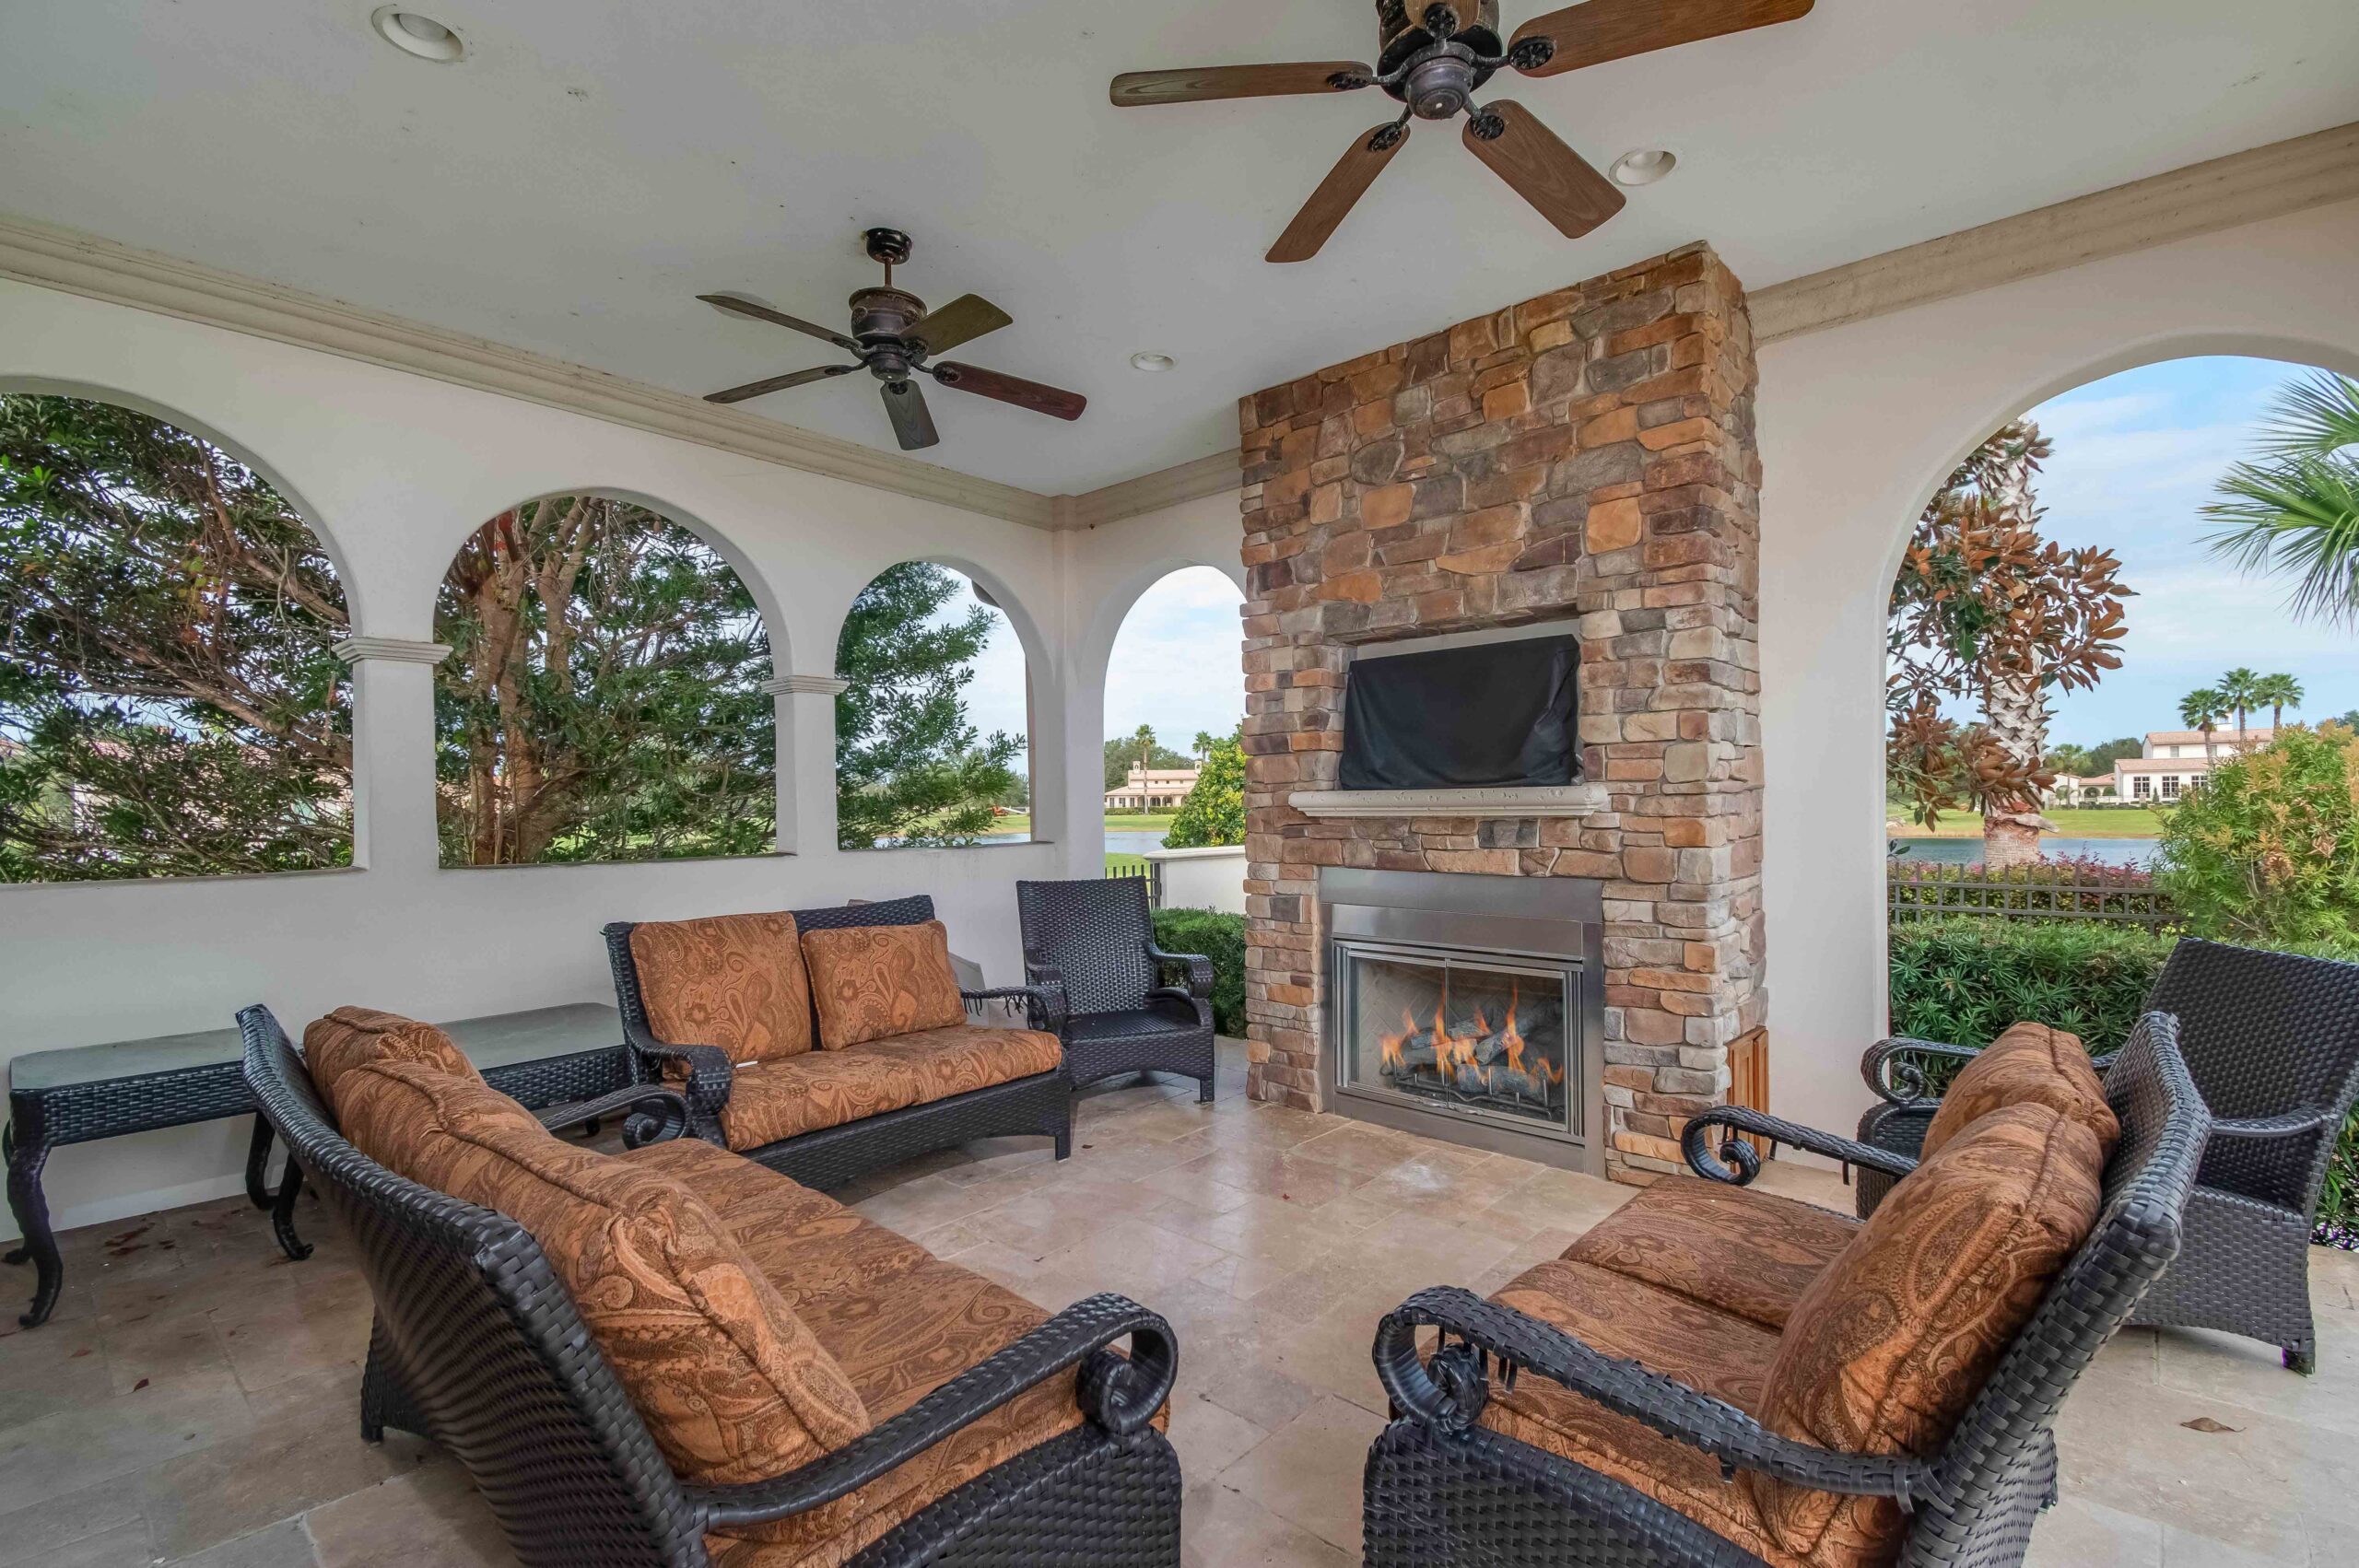 The floor-to-ceiling fireplace at 5028 W Anthony Road, Ocala, Florida 34475